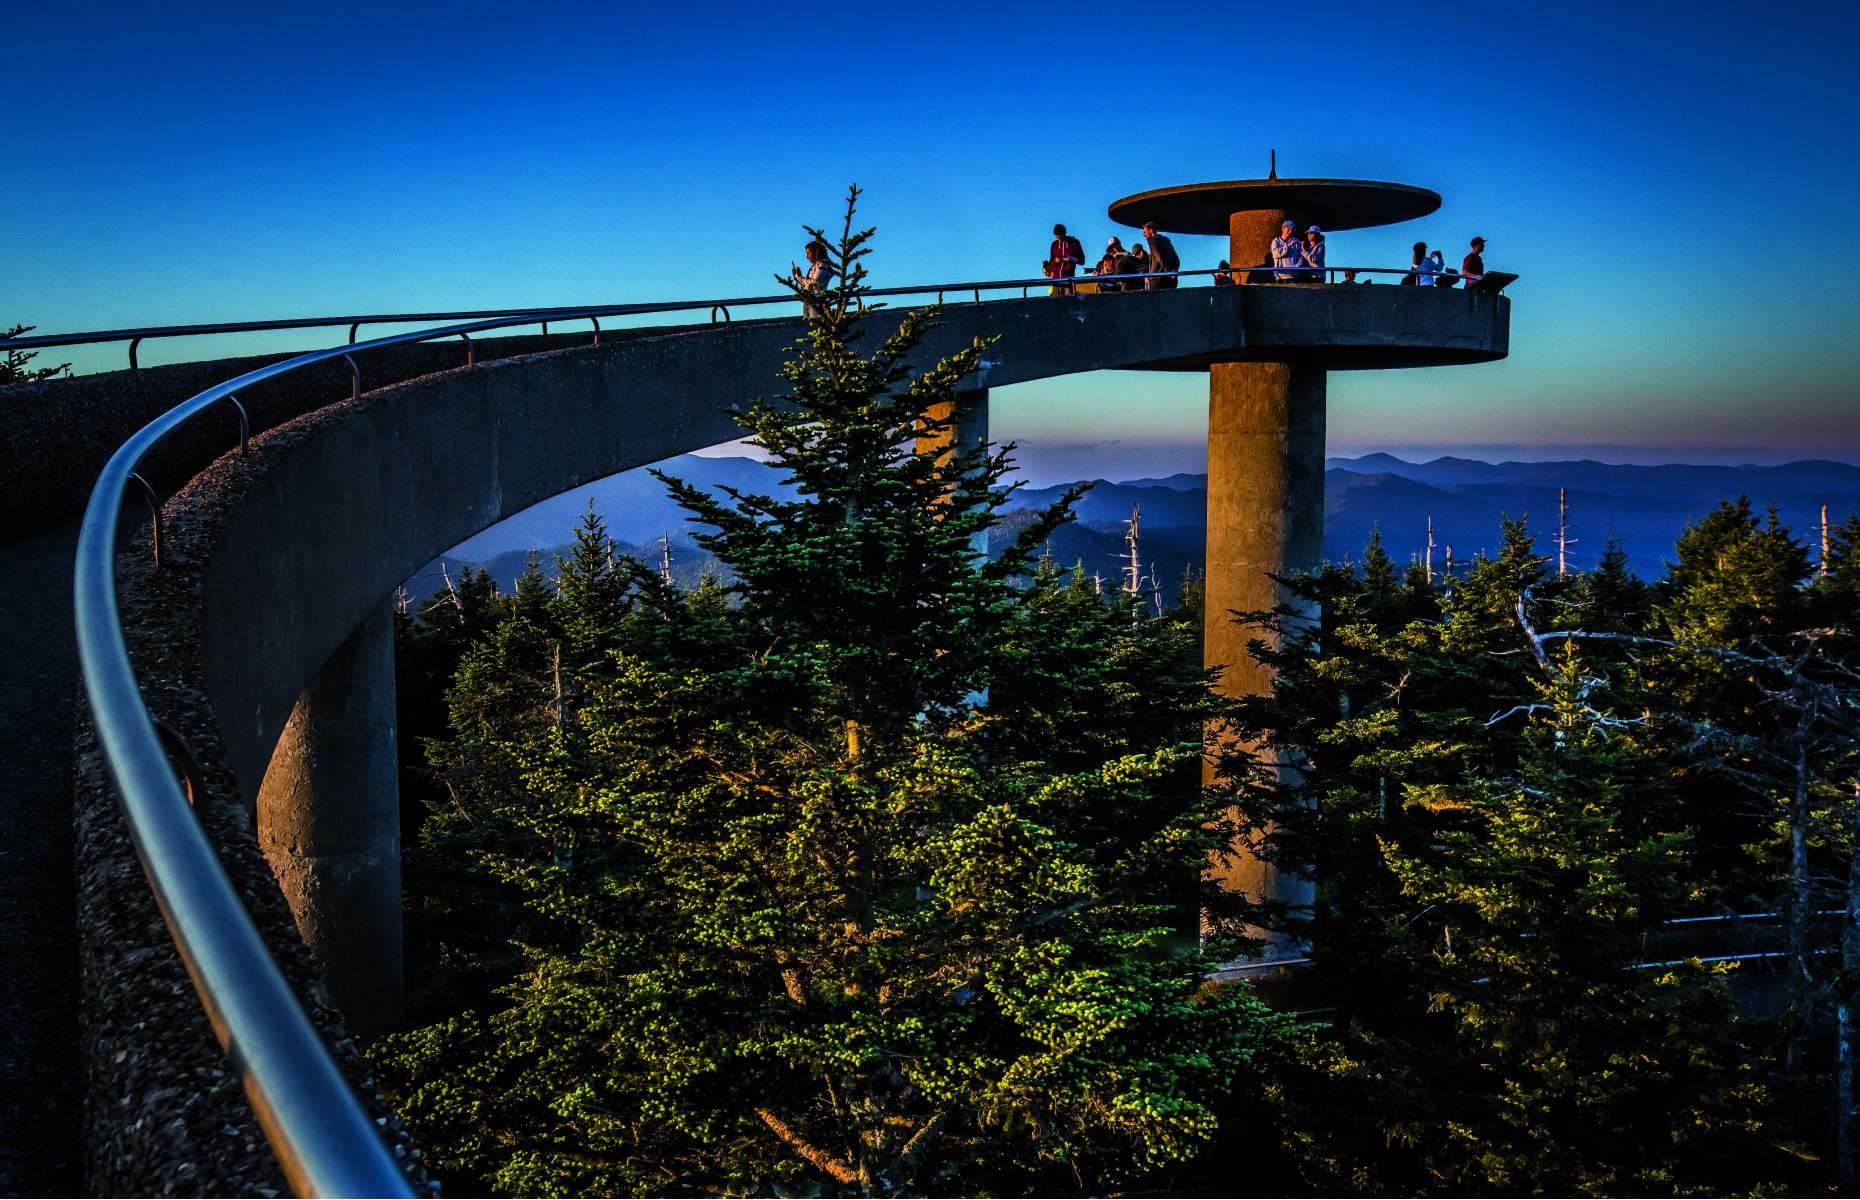 <p>The landscape of the Great Smoky Mountains is shaped by an unbroken chain of peaks that tumble across more than 36 miles. Of all the mountains in the national park, three are the most imposing – Clingmans Dome, Mount Guyot, and Mount LeConte. Clingmans Dome is not only the highest point in the Smokies and in all of Tennessee, but it is also the third highest mountain east of the Mississippi. An observation tower (pictured) at its summit rewards those willing to tackle the steep half-mile walk to get to it.</p>